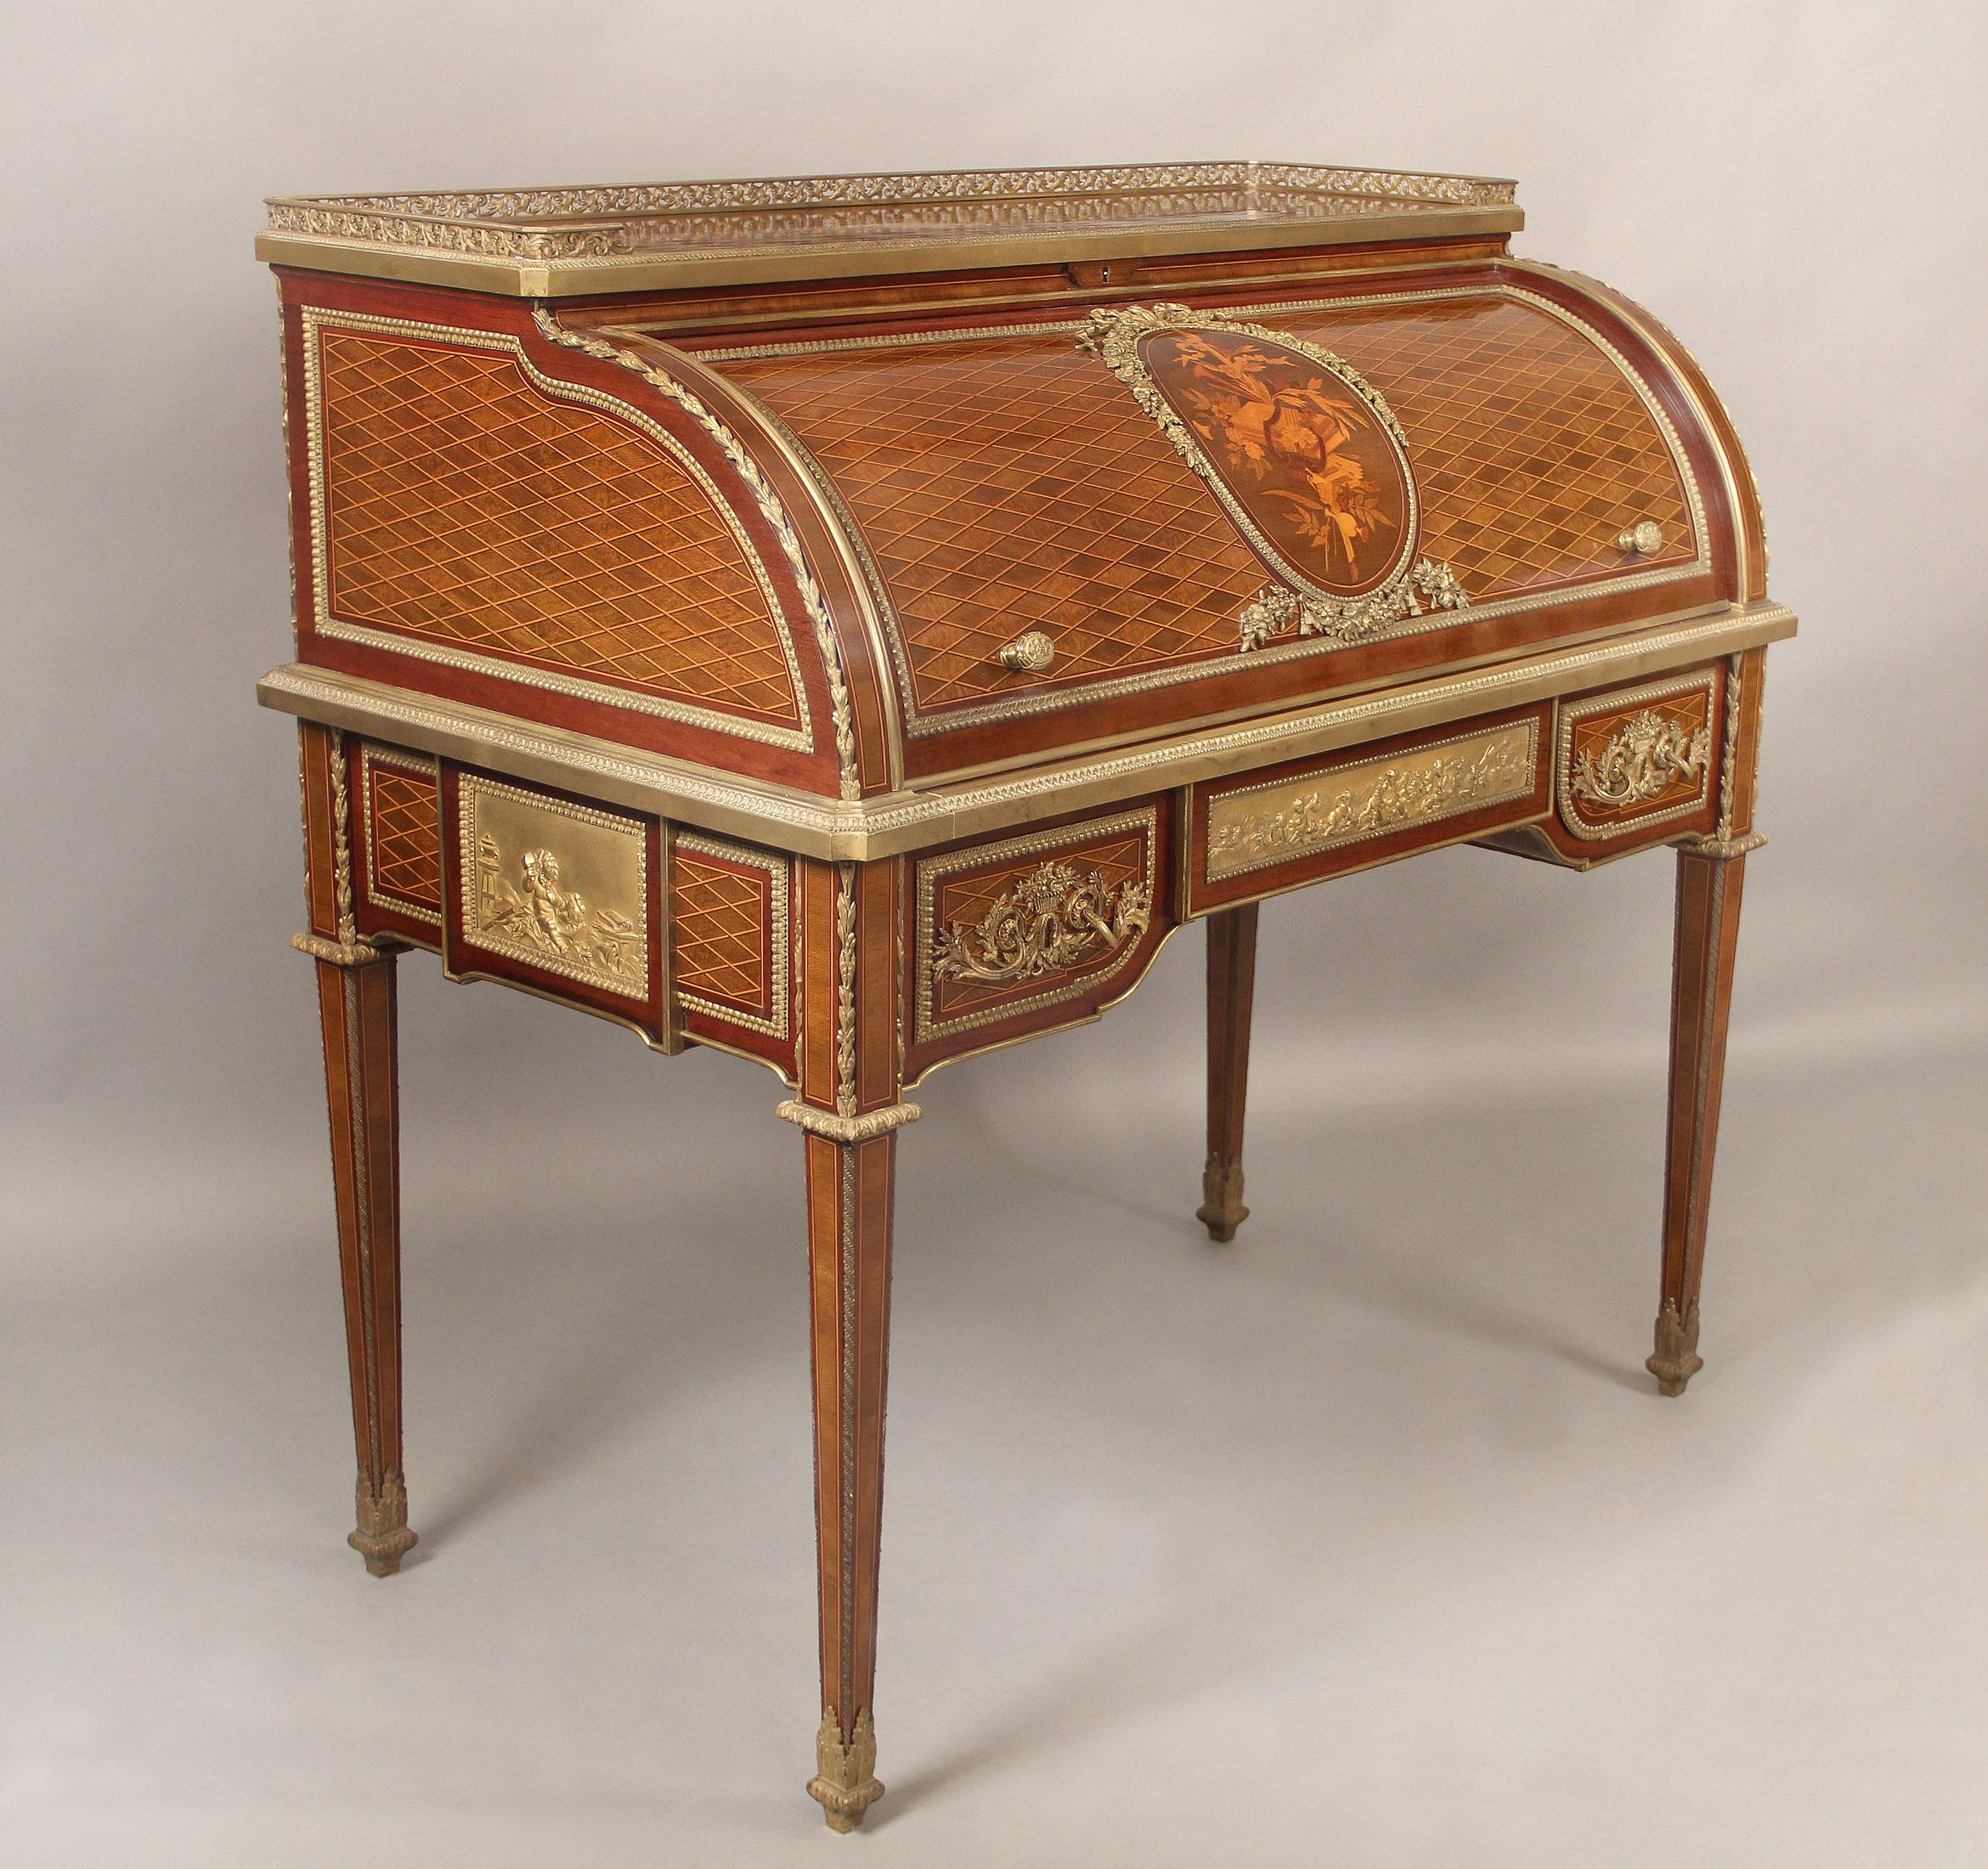 An excellent quality late 19th century gilt bronze mounted marquetry and parquetry bureau a cylinder by François Linke

François Linke – Index no. 100

The rectangular galleried top inlaid with lozenge parquetry, above a cylinder roll-top